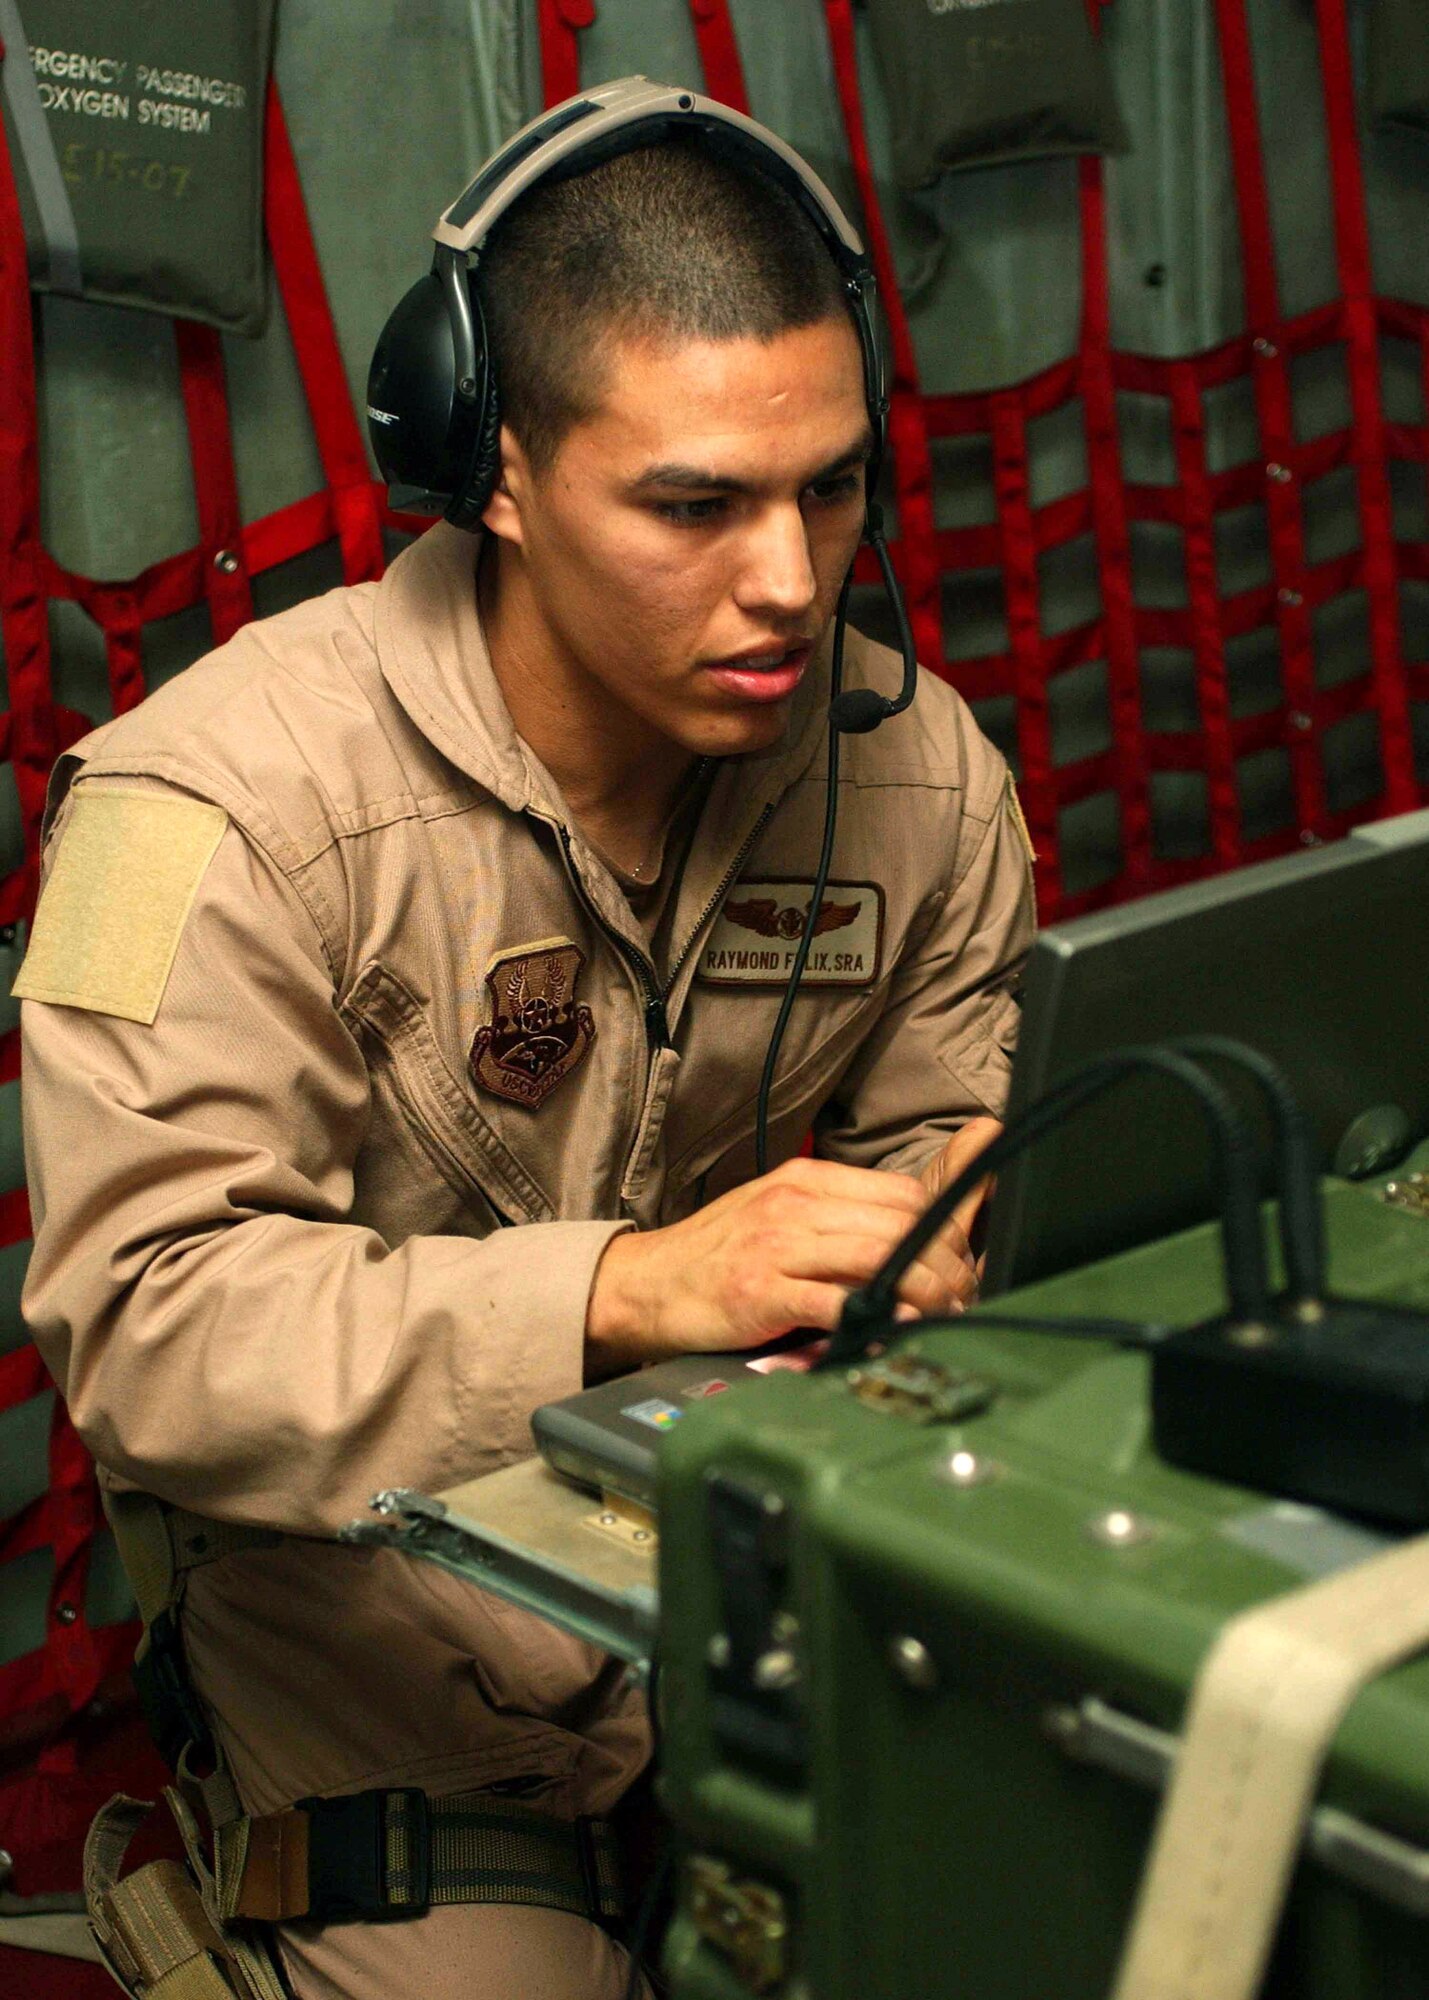 Senior Airman Raymond Felix checks over his communications gear before taking off on a Joint Airborne Battle Staff mission over Iraq.  While they fly, joint service battle staff members monitor several radio channels at a time, listening in on coalition convoys on the ground and relaying radio calls when necessary, ranging from routine radio checks to medical evacuation requests.  Airman Felix is a communications technician with the battle staff.  (U.S. Army photo/Army Sgt. Alexandra Hemmerly-Brown)